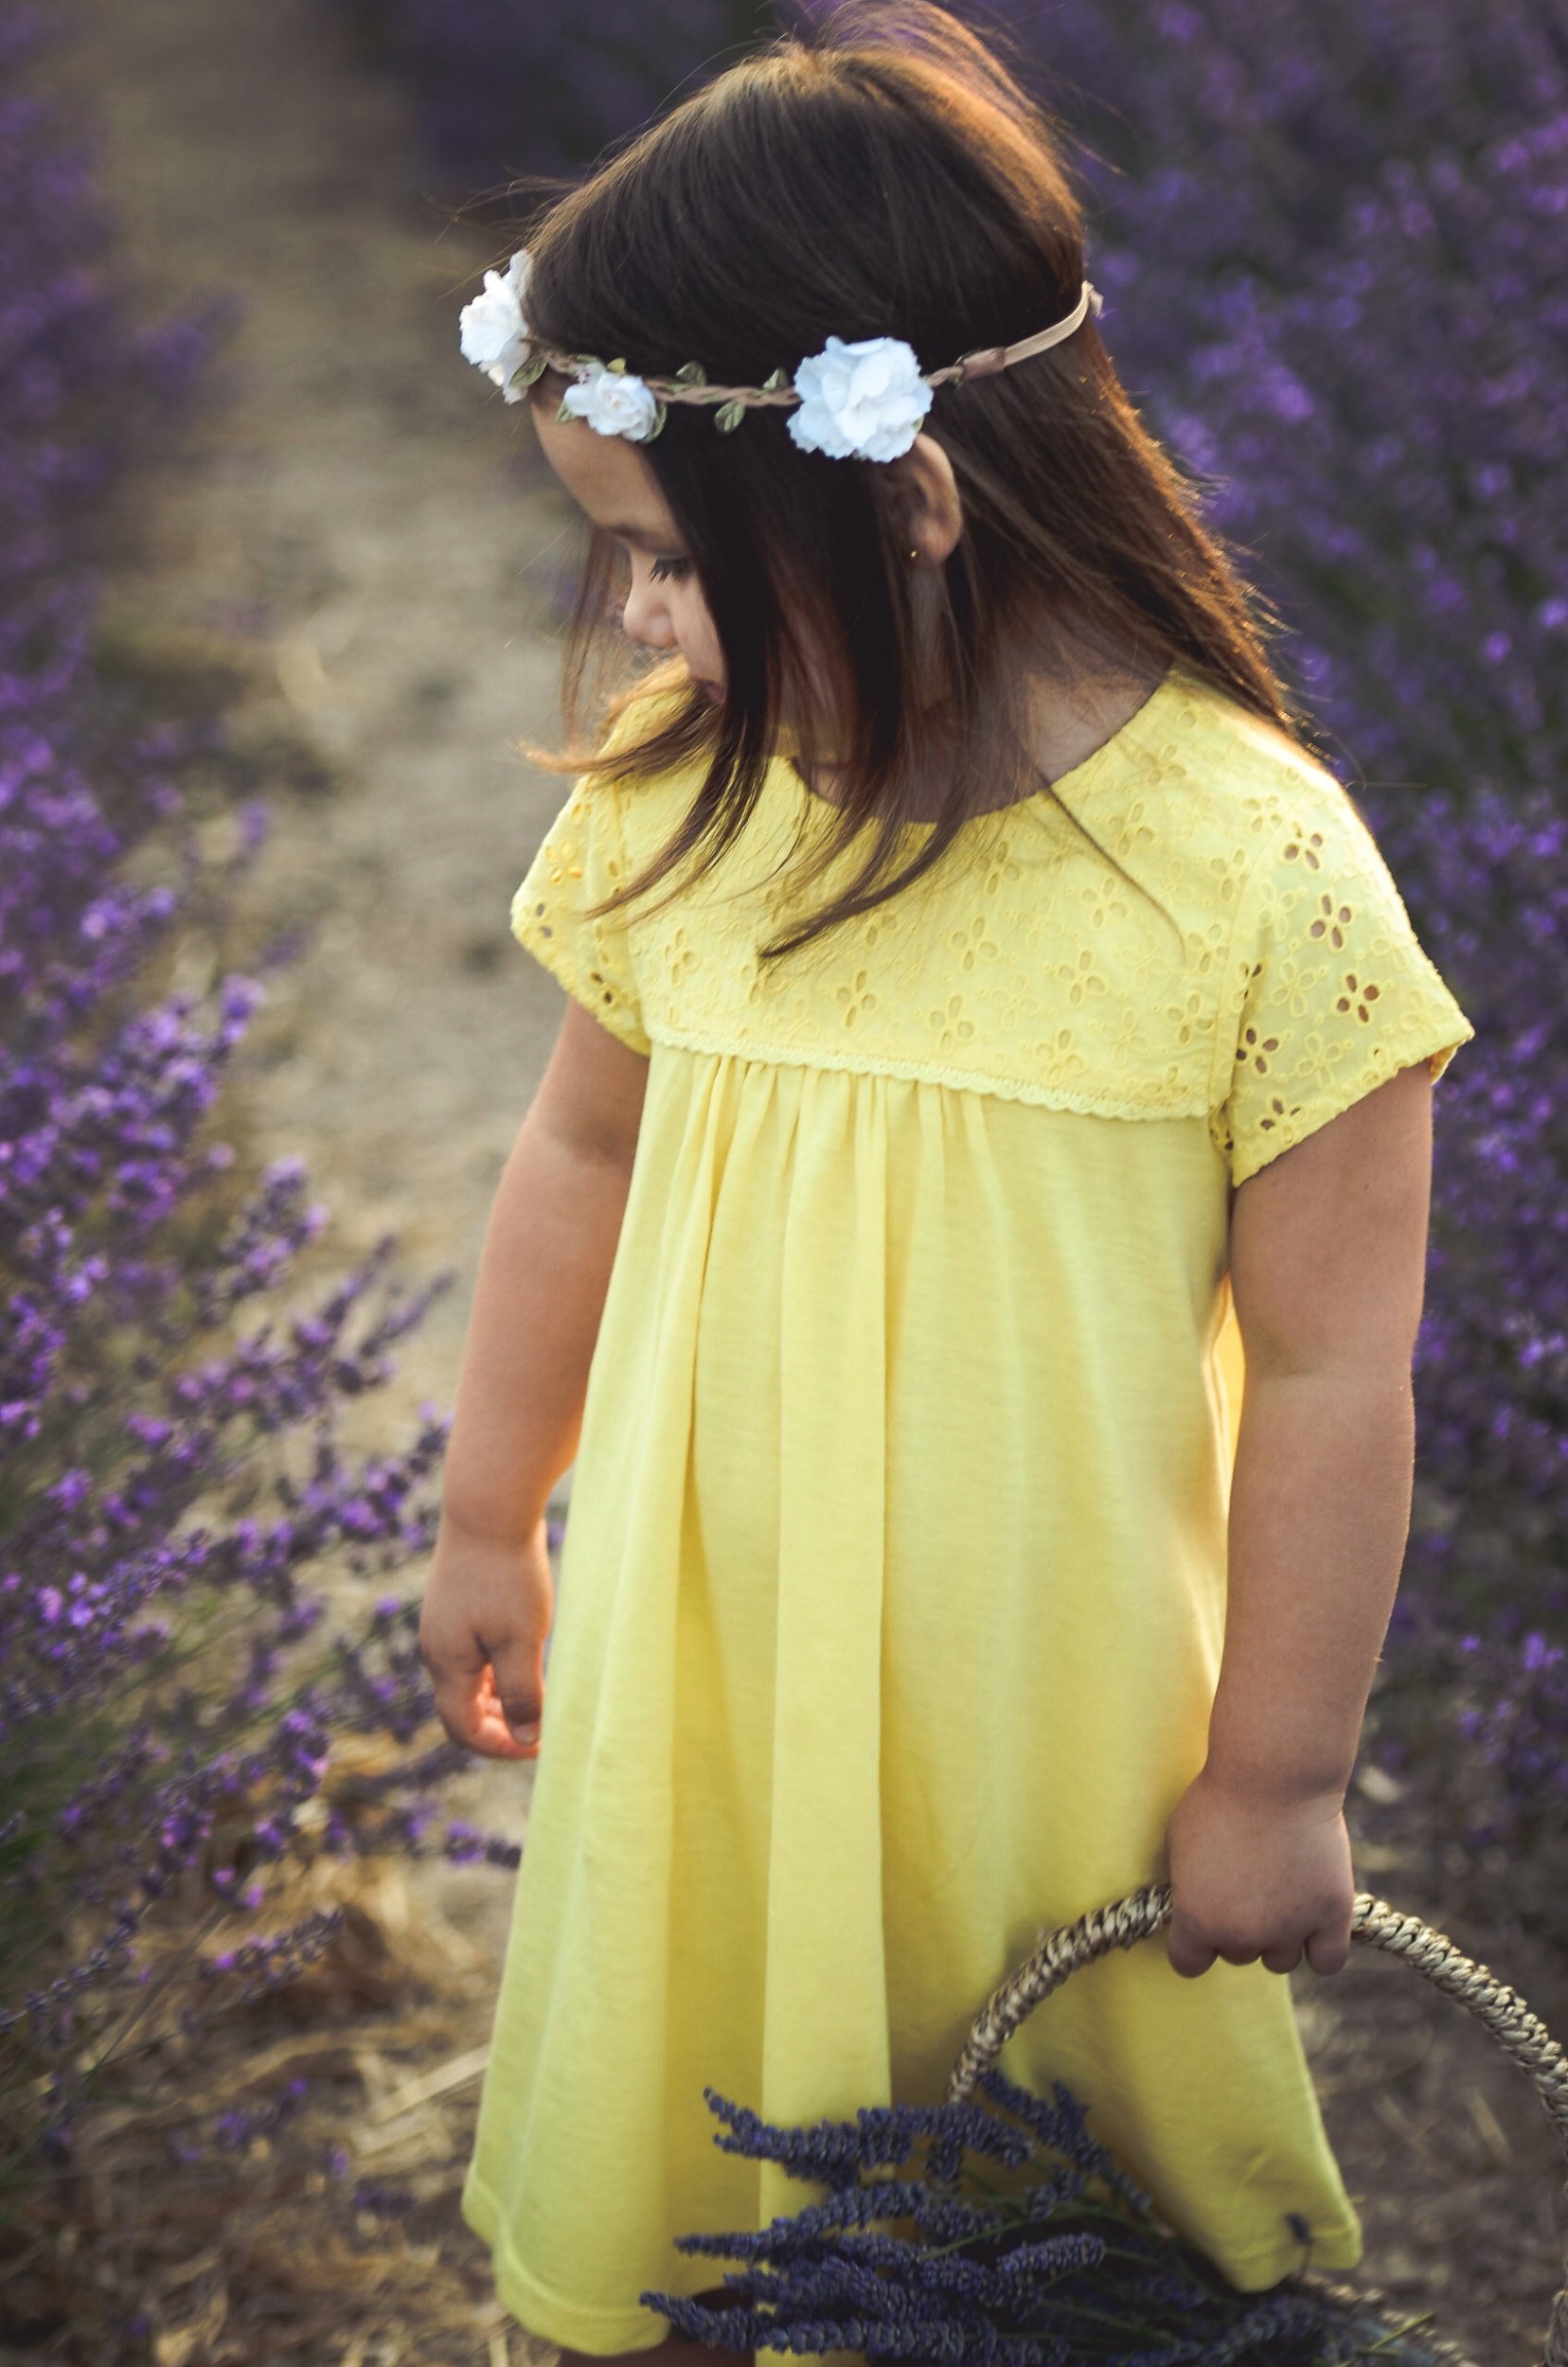 processed_Kirsty_stanley_lordington_lavender_beside_the_seaside_photography-151.jpg